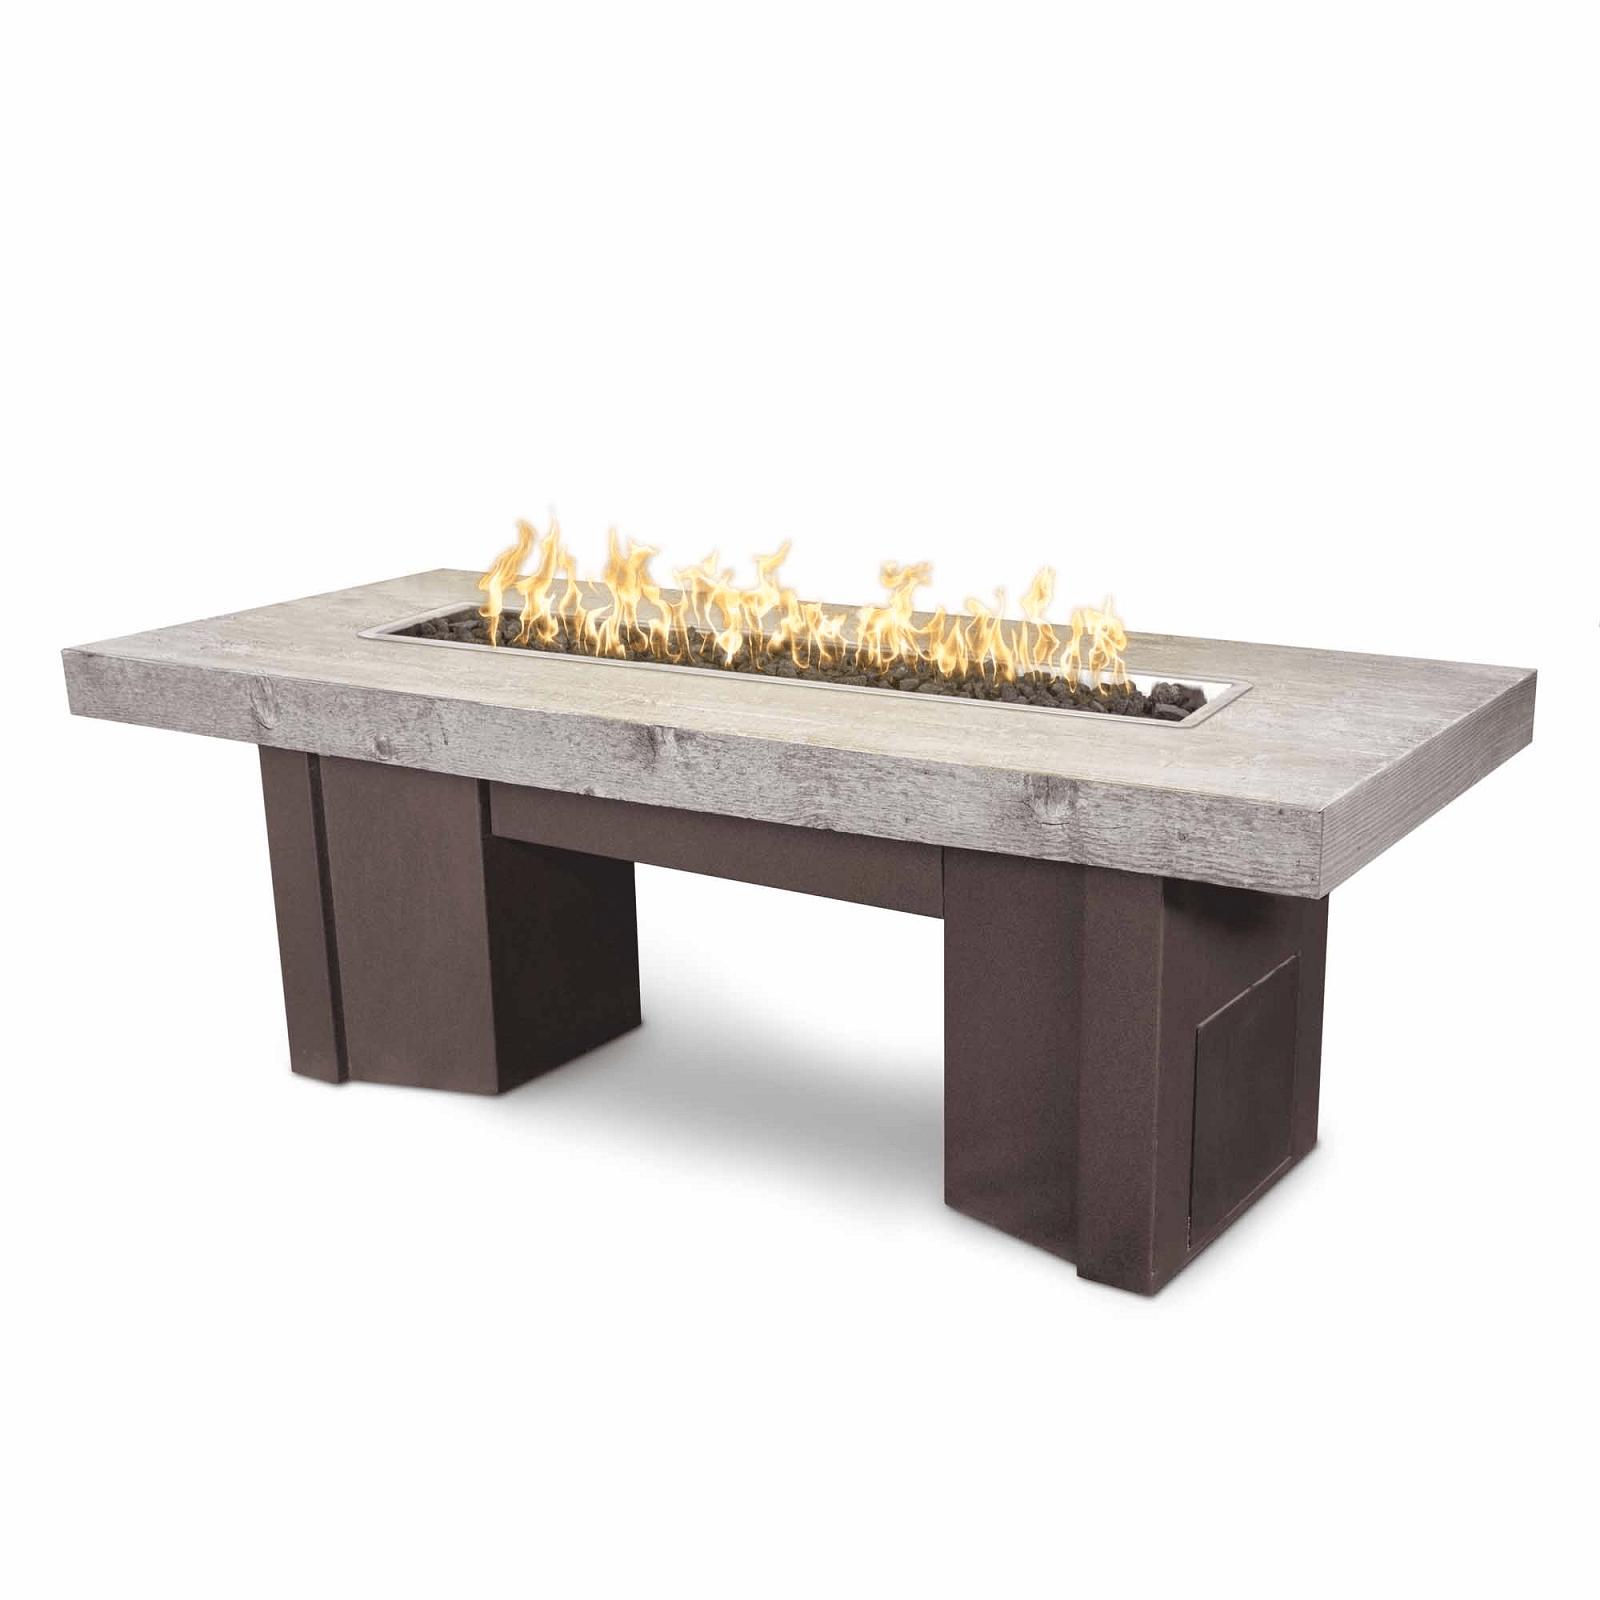 The Outdoor Plus Fire Features The Outdoor Plus 78" Alameda Fire Table Wood Grain - Flame Sense System with Push Button Spark Igniter / OPT-ALMWG78FSEN